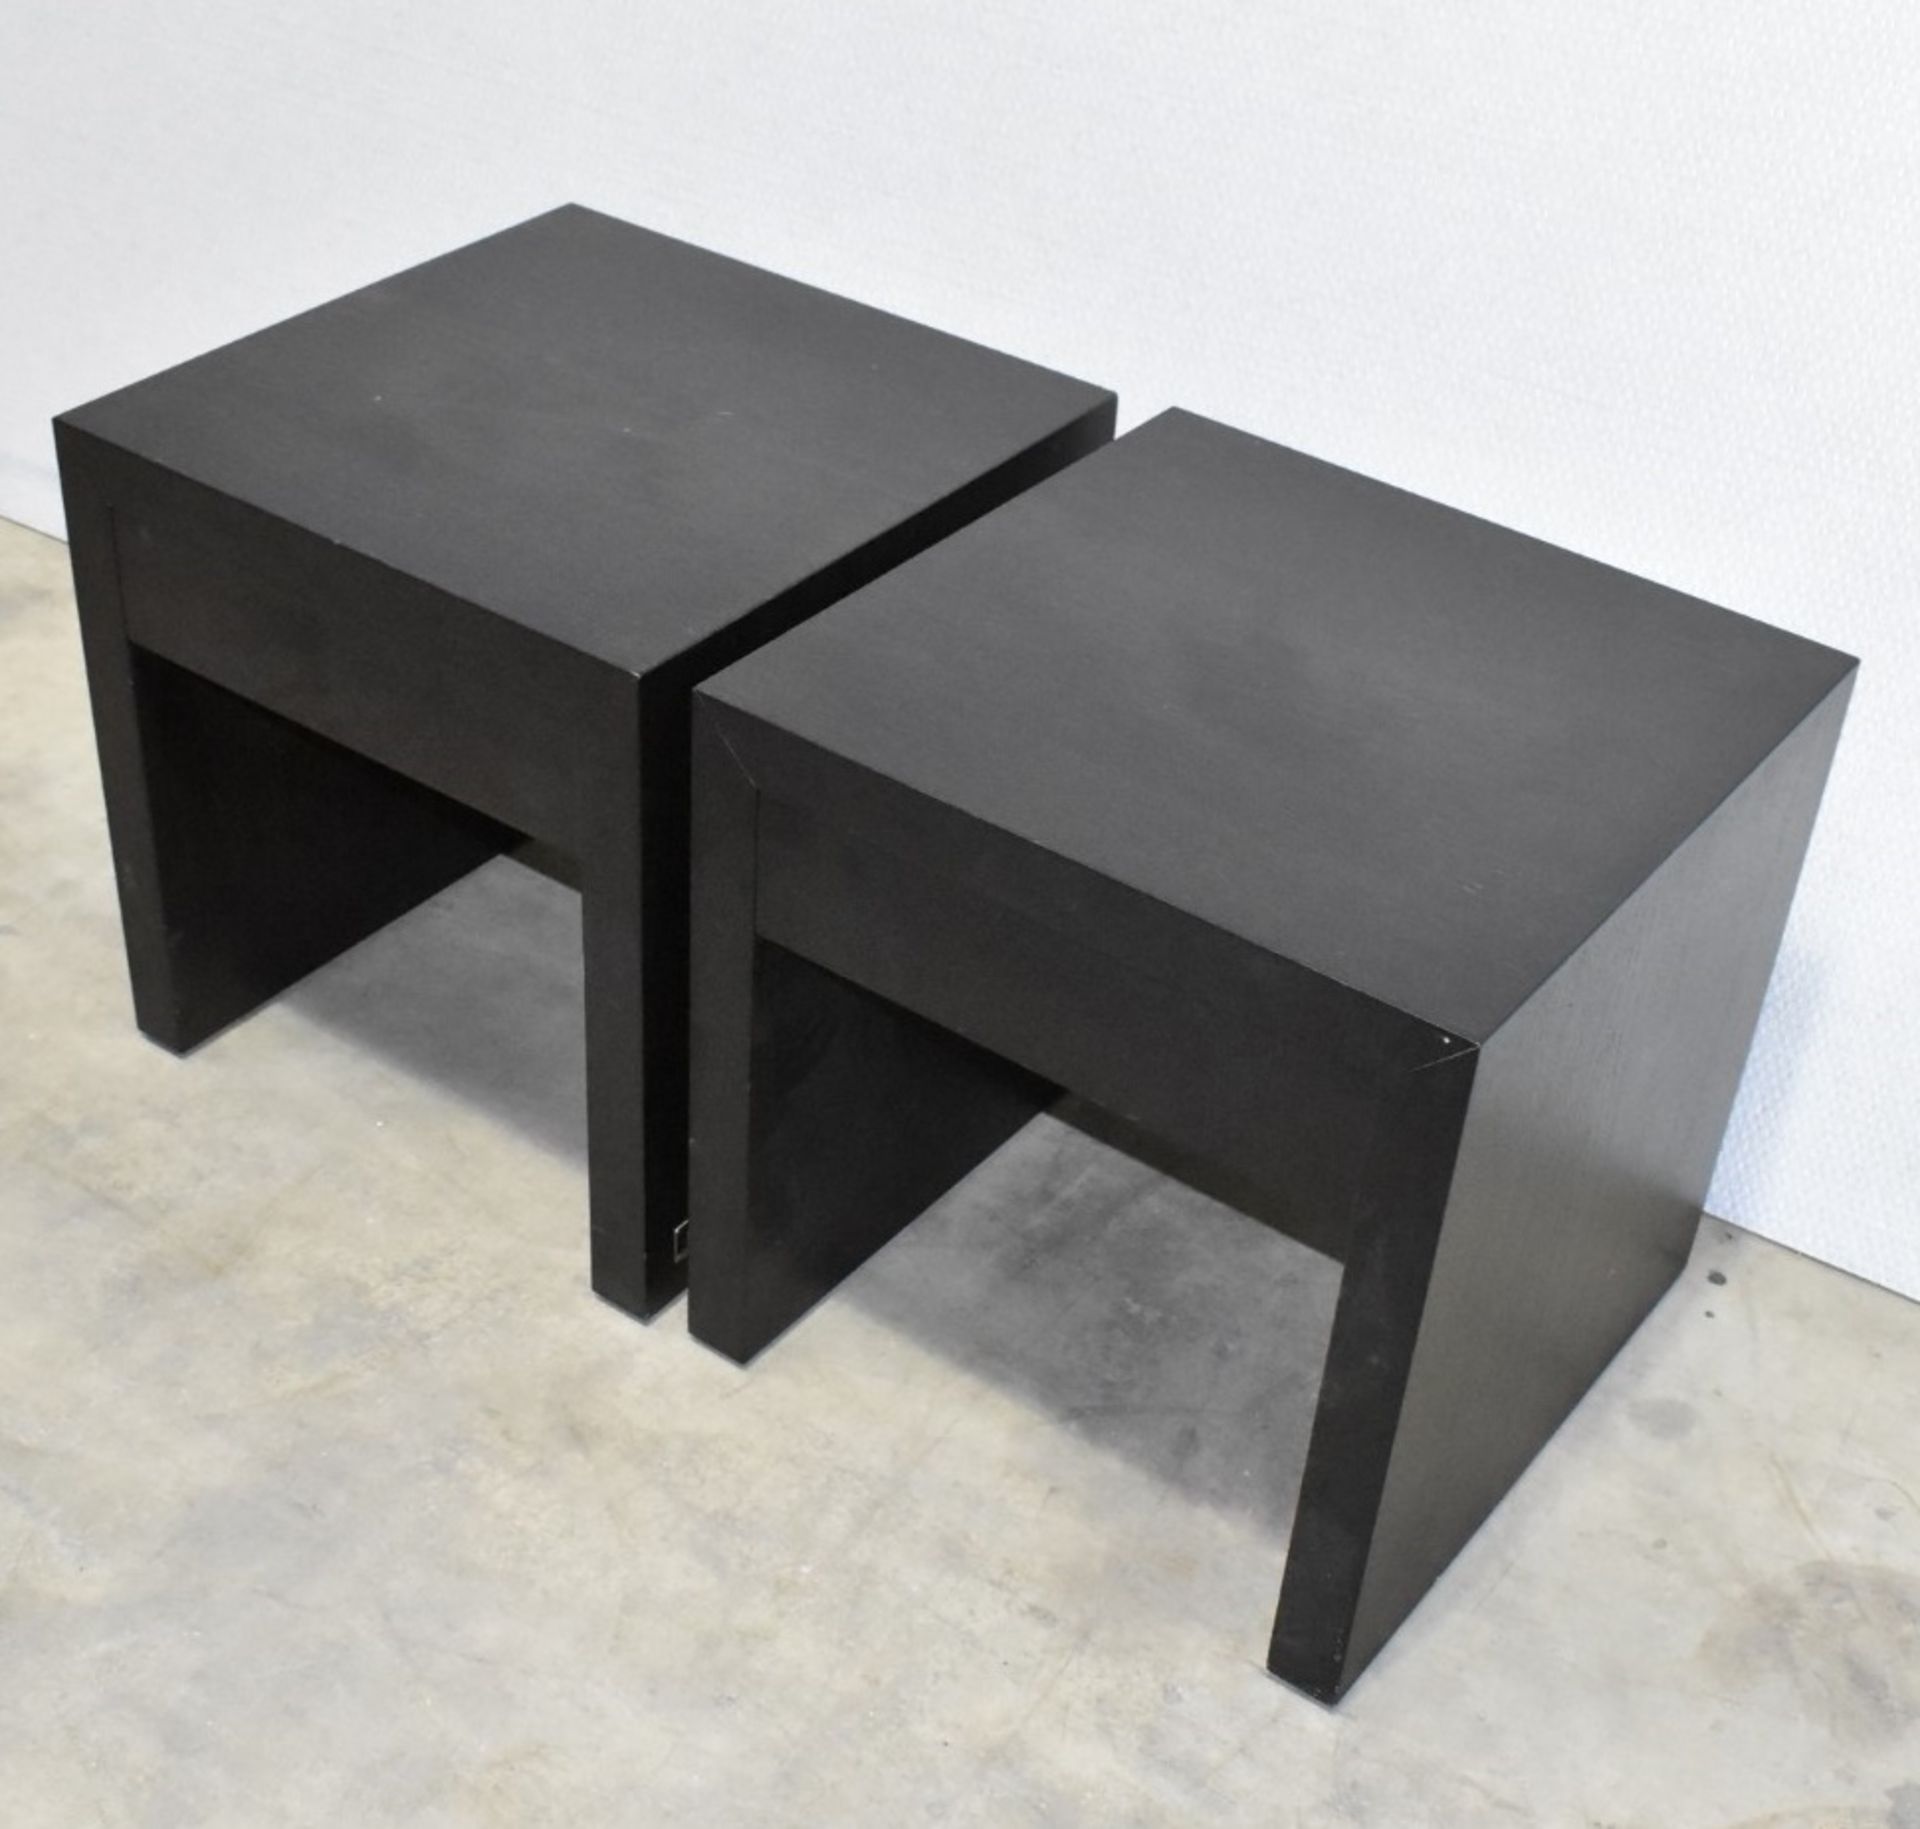 Pair of FENDI Modern Designer Wooden Bedside Cabinets Featuring Suede-style Lined 1-Drawer Storage - Image 2 of 15